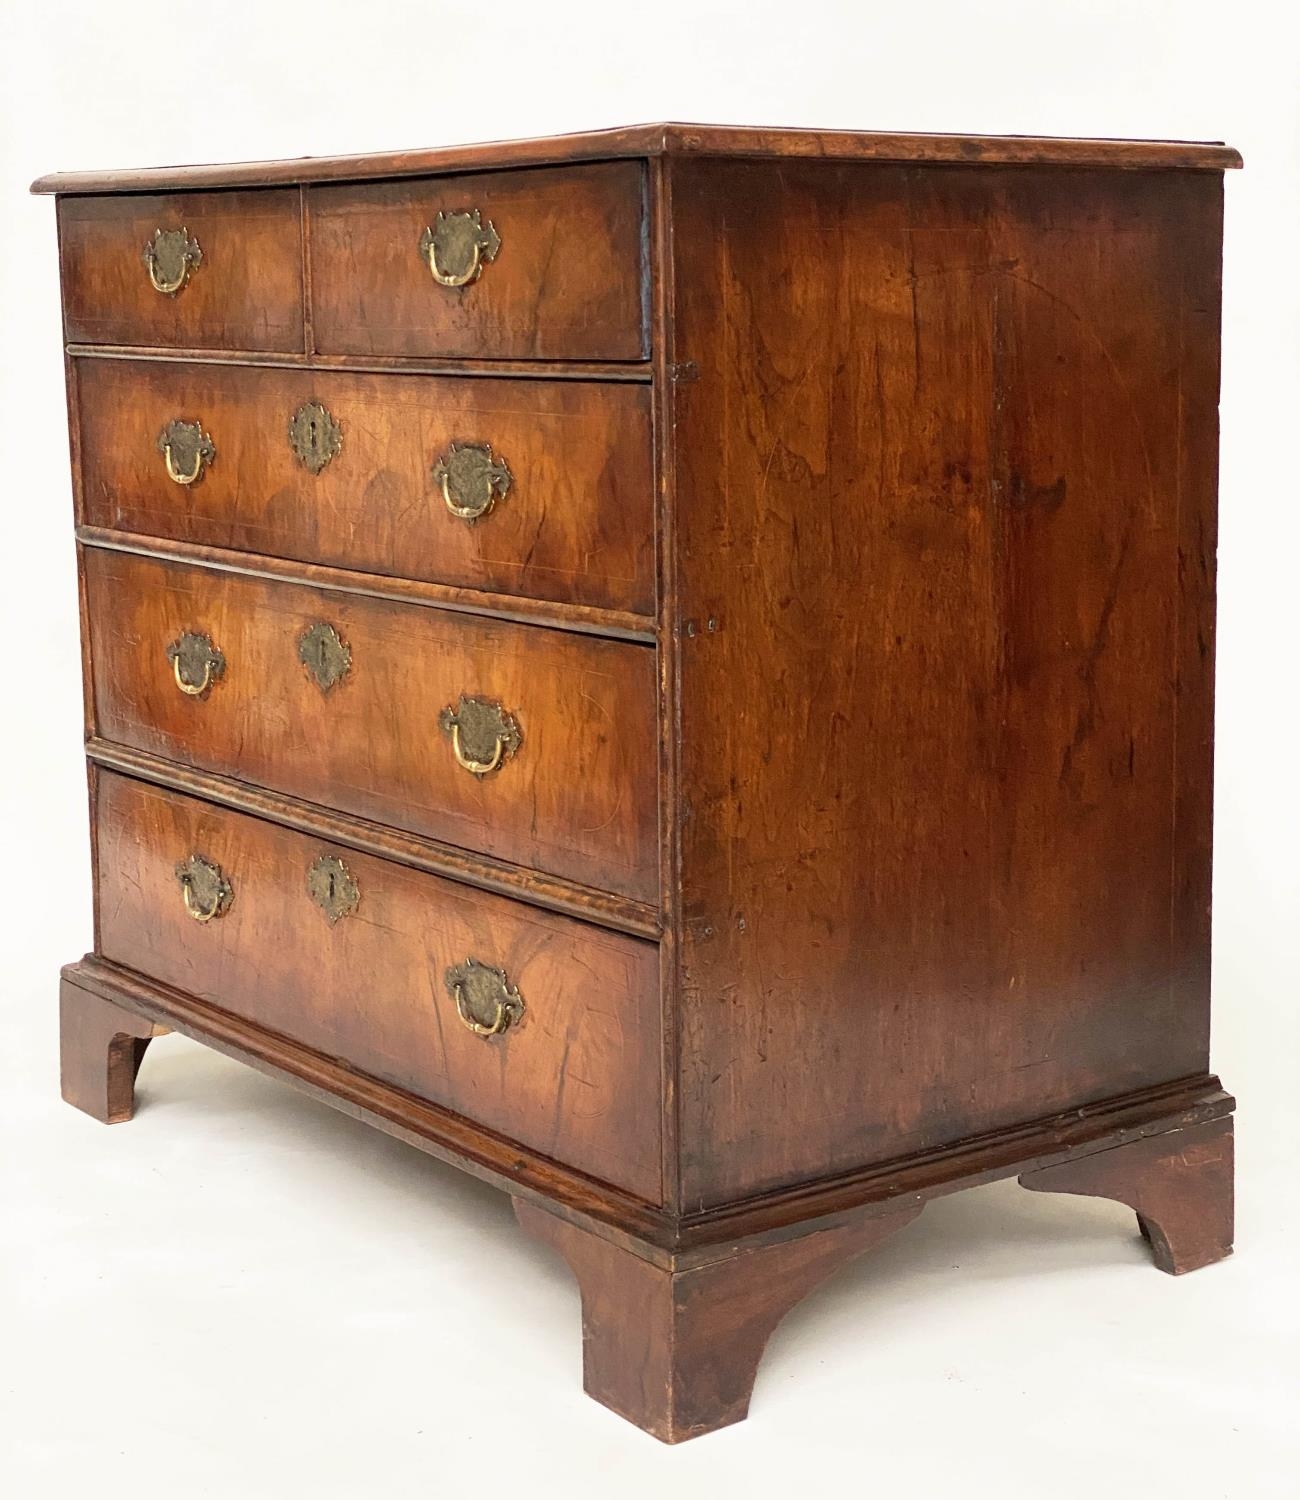 CHEST, early 18th century English Queen Anne figured walnut with two short and three long drawers, - Image 6 of 9